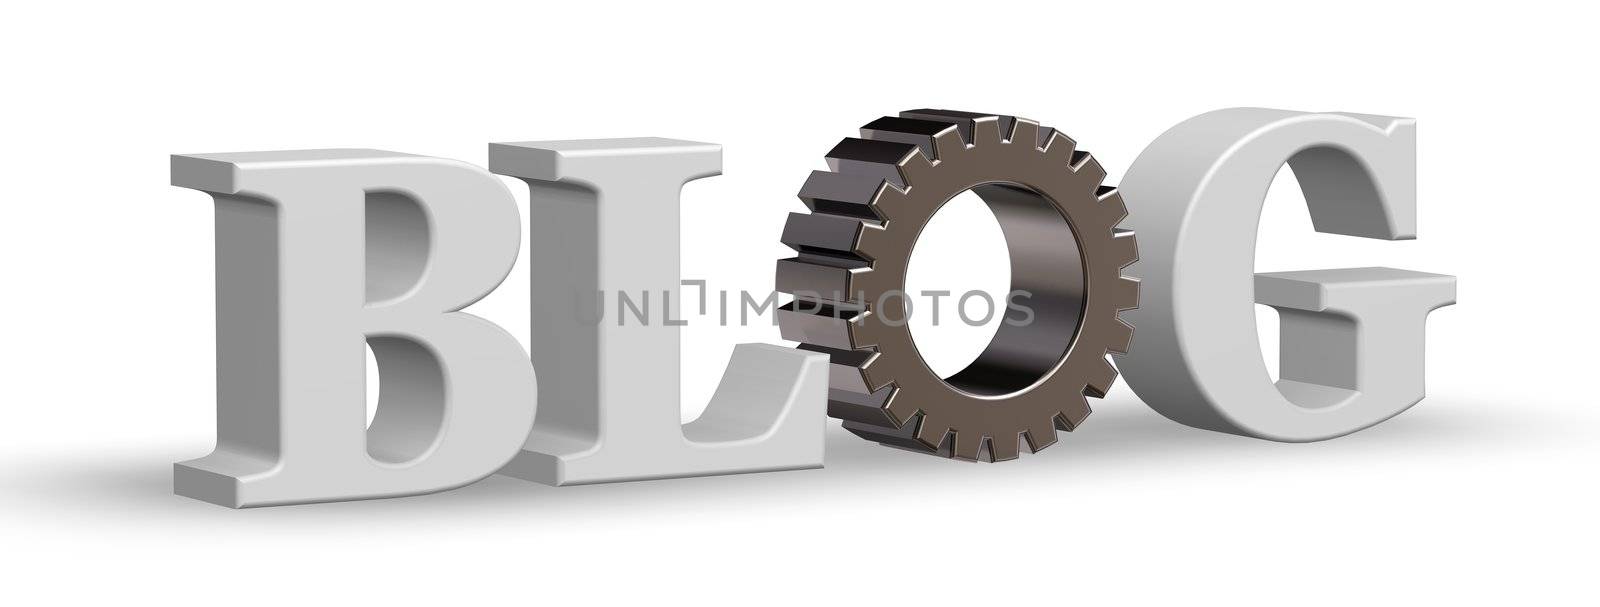 the word blog with gear wheel - 3d illustration